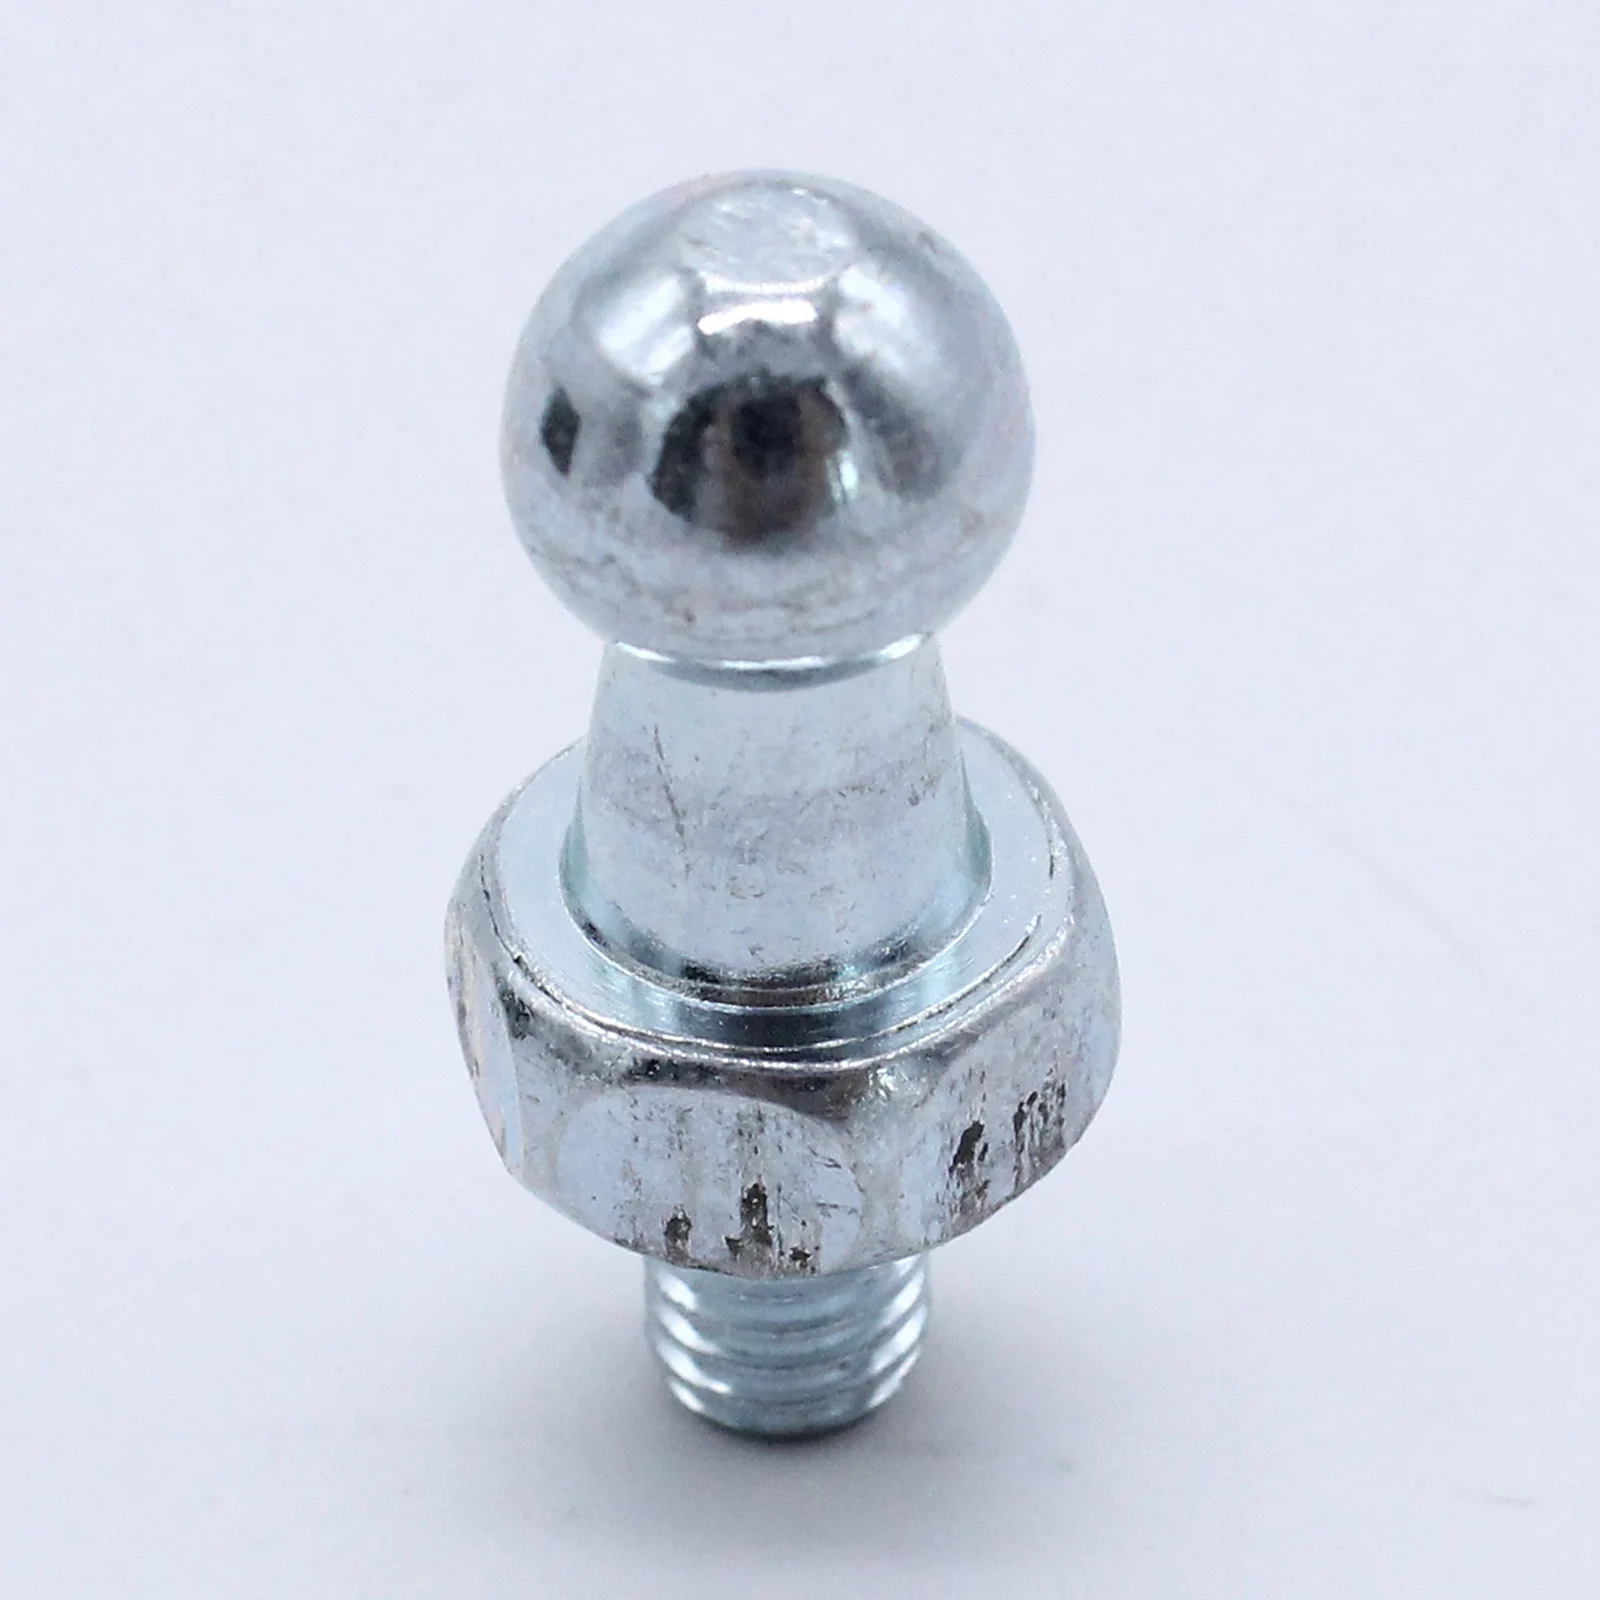 New Car Styling Quick Aluminum Short Gear Shifter Replacement for Ford Fiesta MK7 ST180 1.6 Turbo